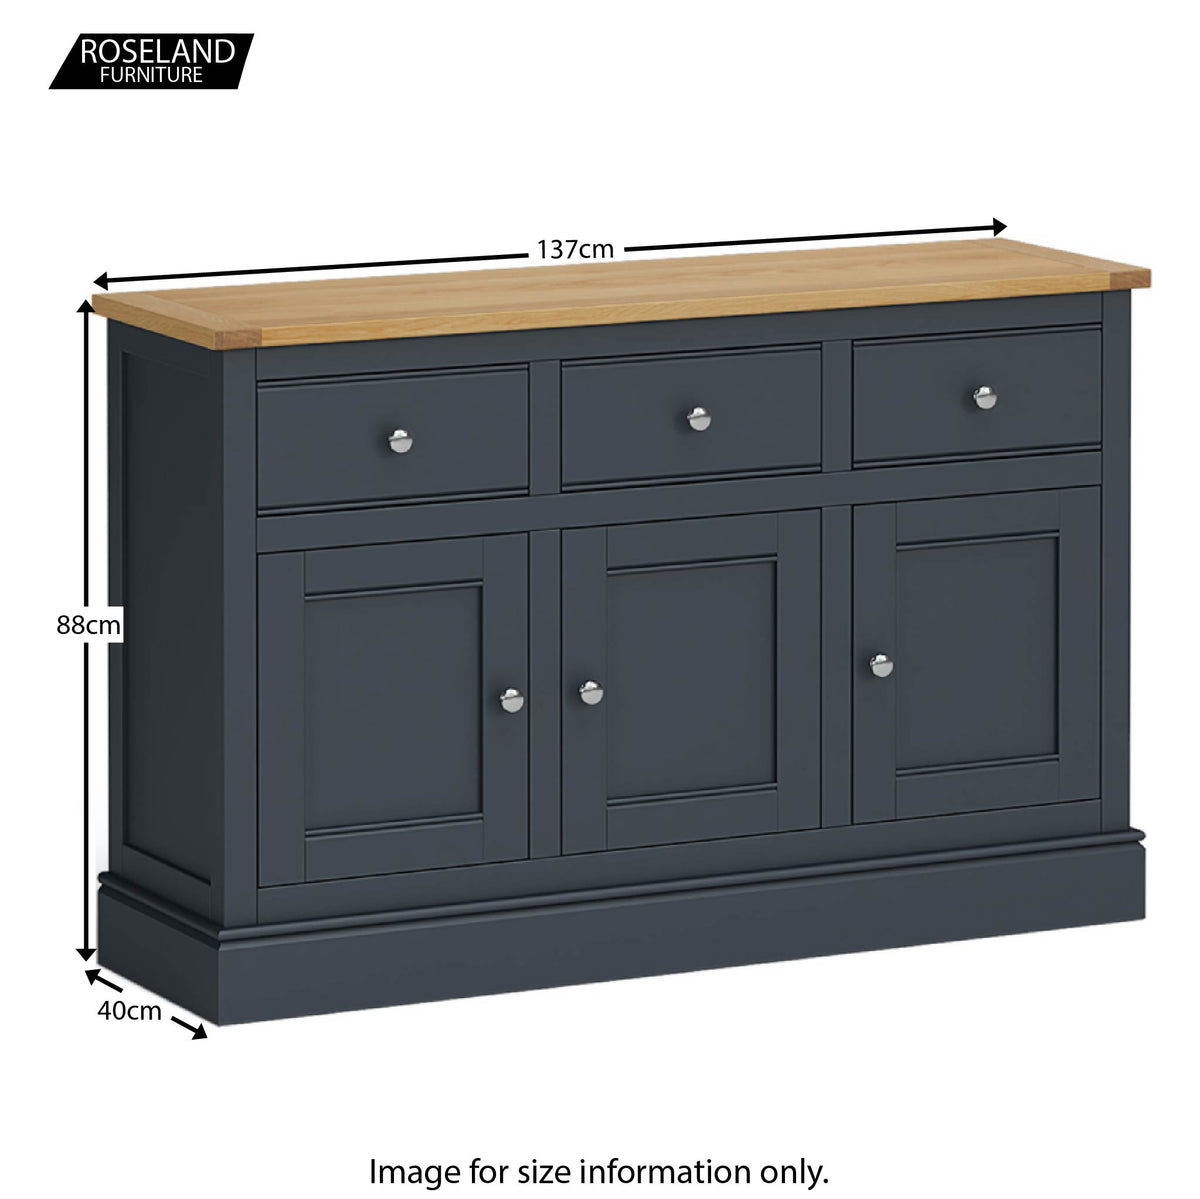 Chichester Large Sideboard in Charcoal - Size Guide